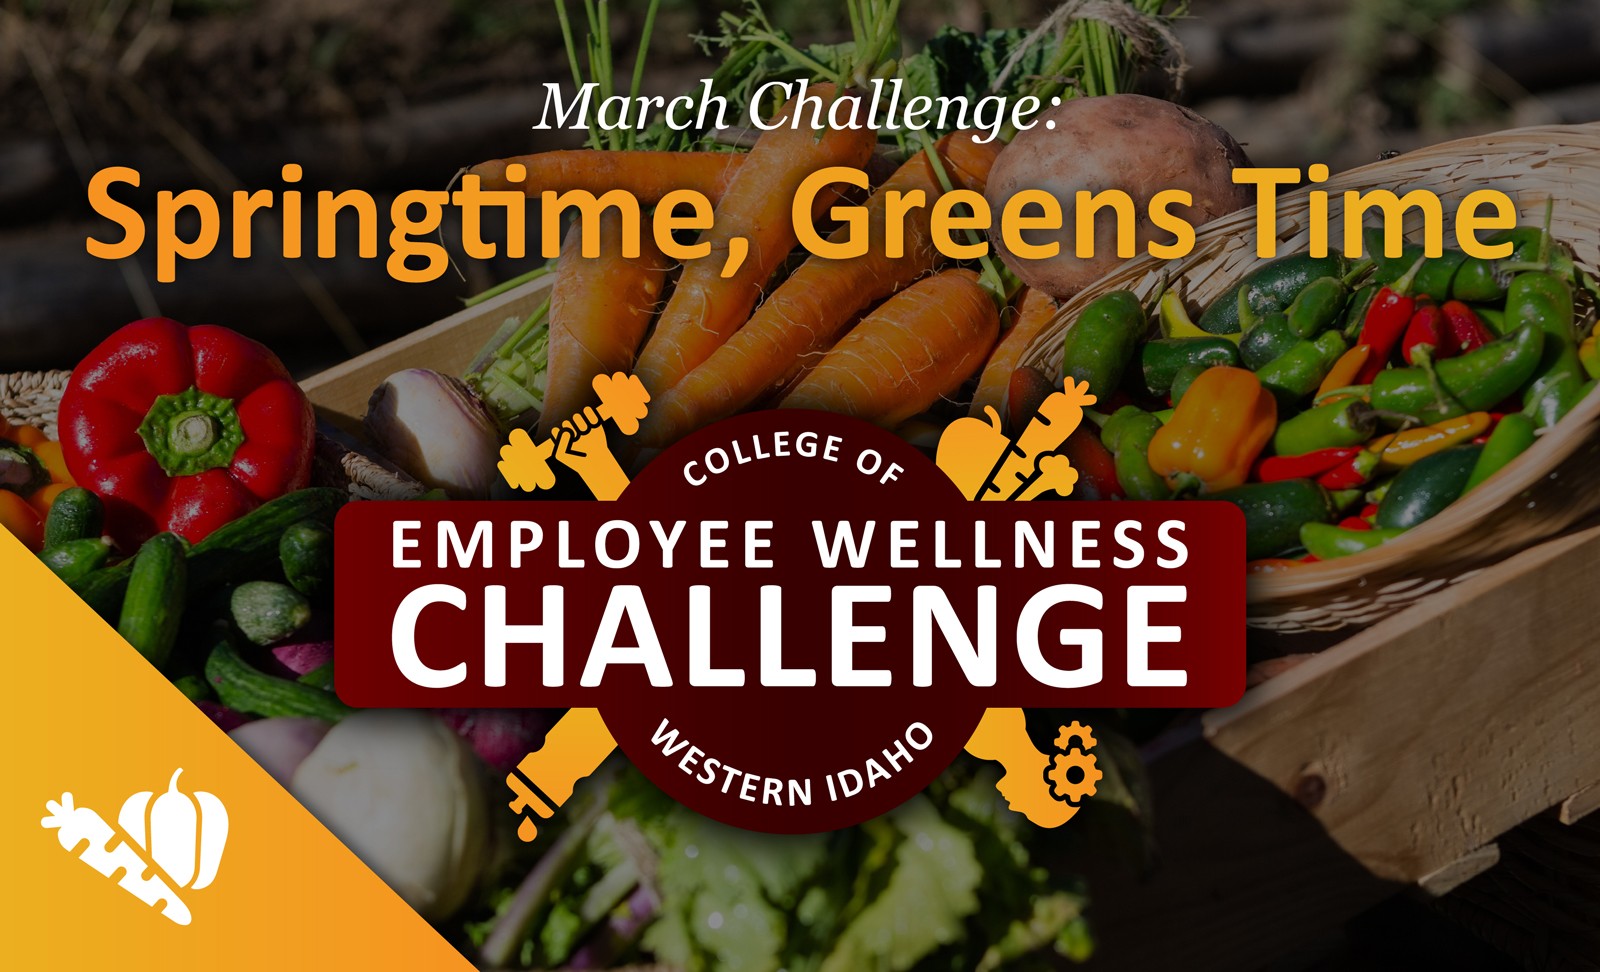 March Employee Wellness Challenge Springtime, Greens Time